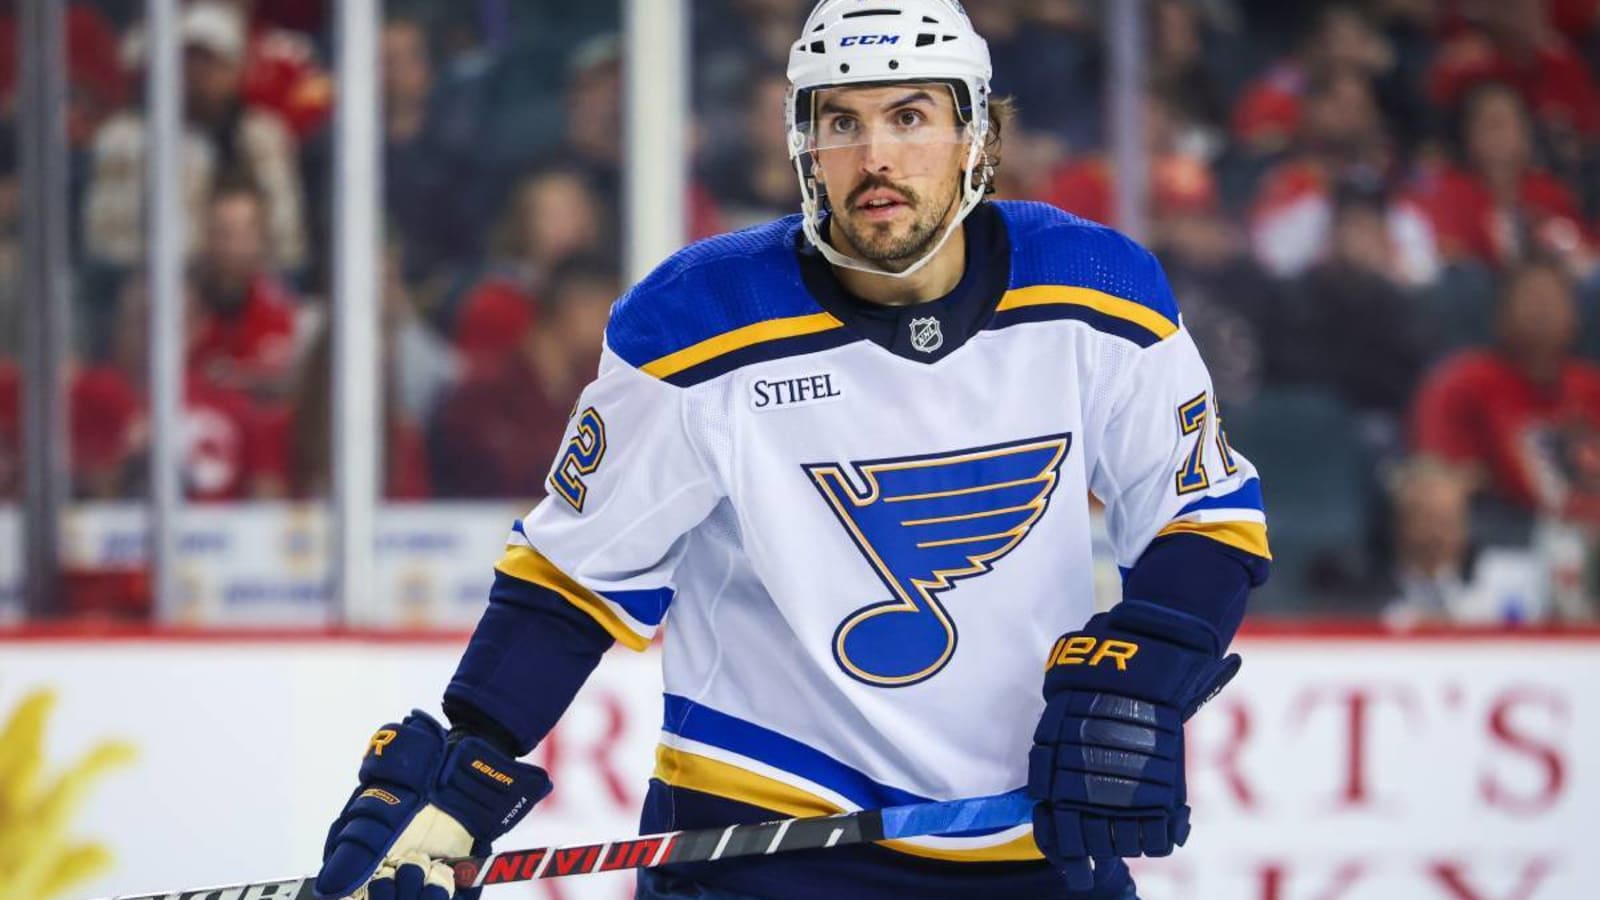 St. Louis Blues activate defenseman Justin Faulk from injured reserve